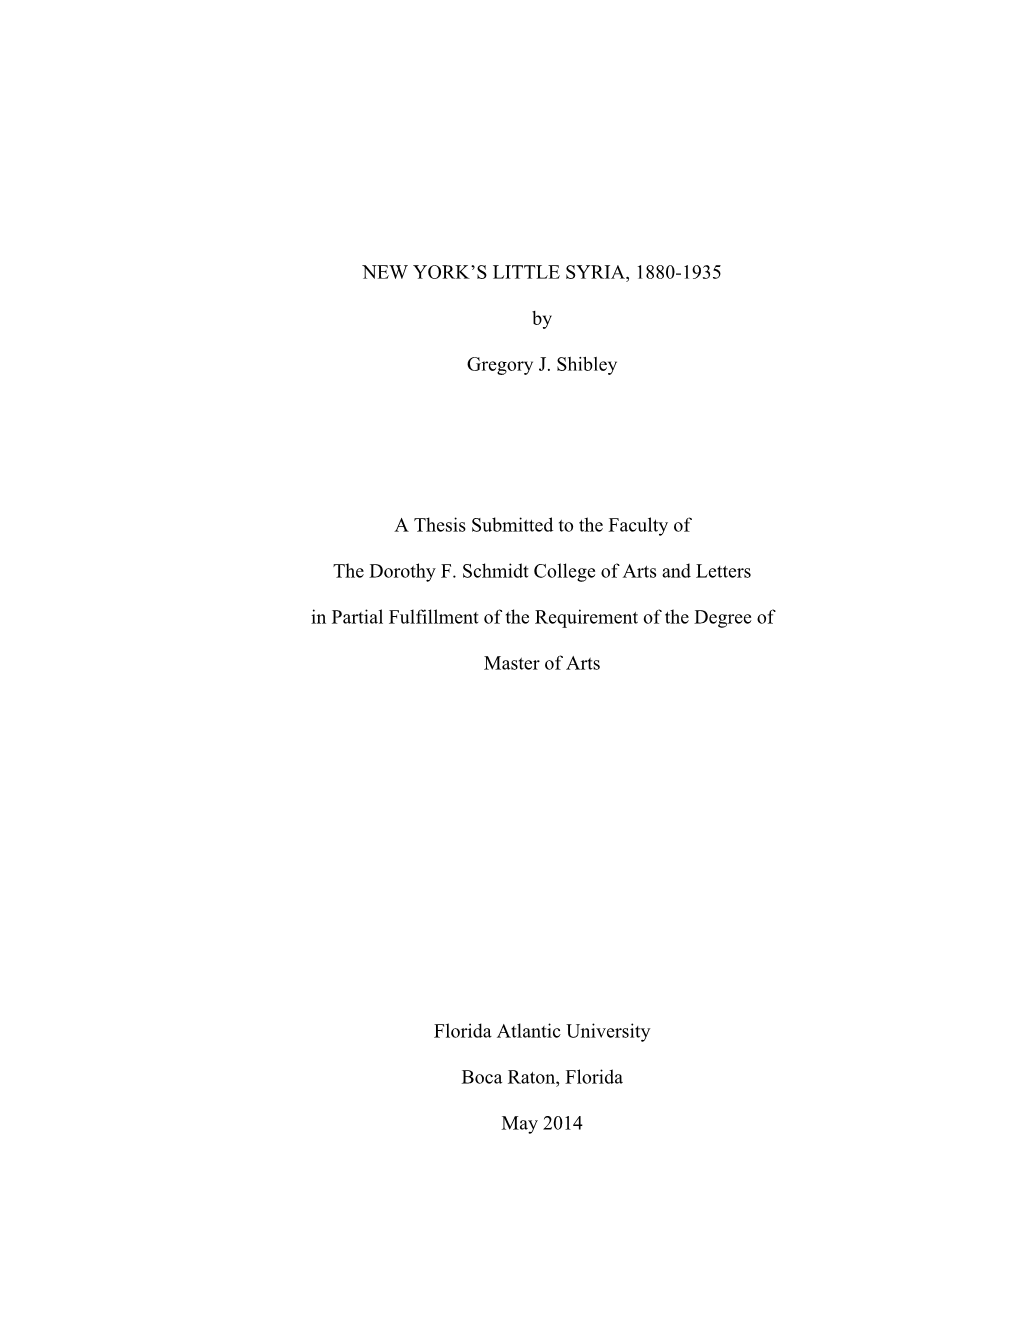 NEW YORK's LITTLE SYRIA, 1880-1935 by Gregory J. Shibley a Thesis Submitted to the Faculty of the Dorothy F. Schmidt College